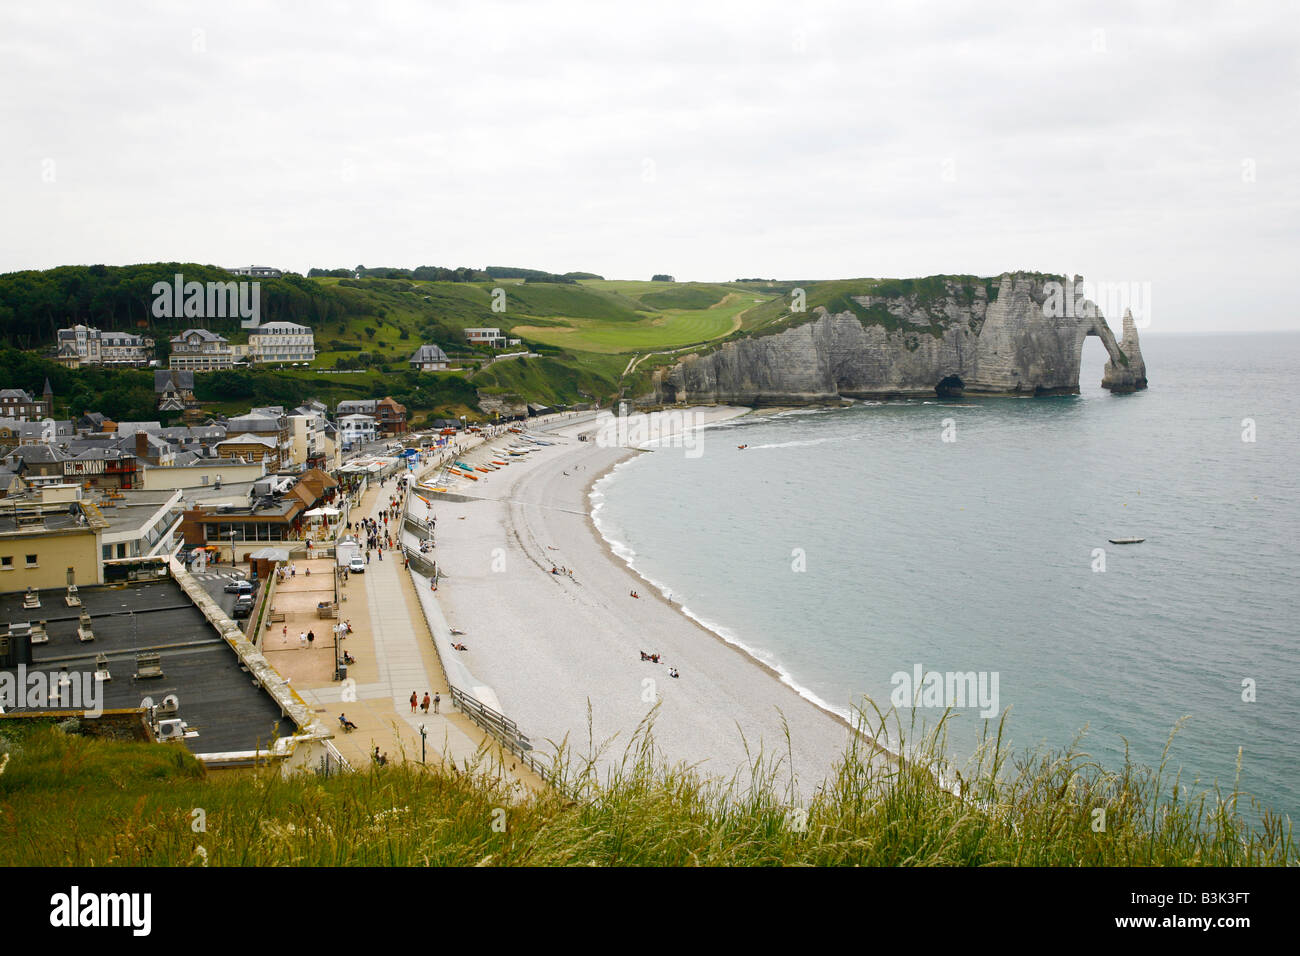 July 2008 - The beach at Etretat with its cliffs also known as Falaises Normandy France Stock Photo